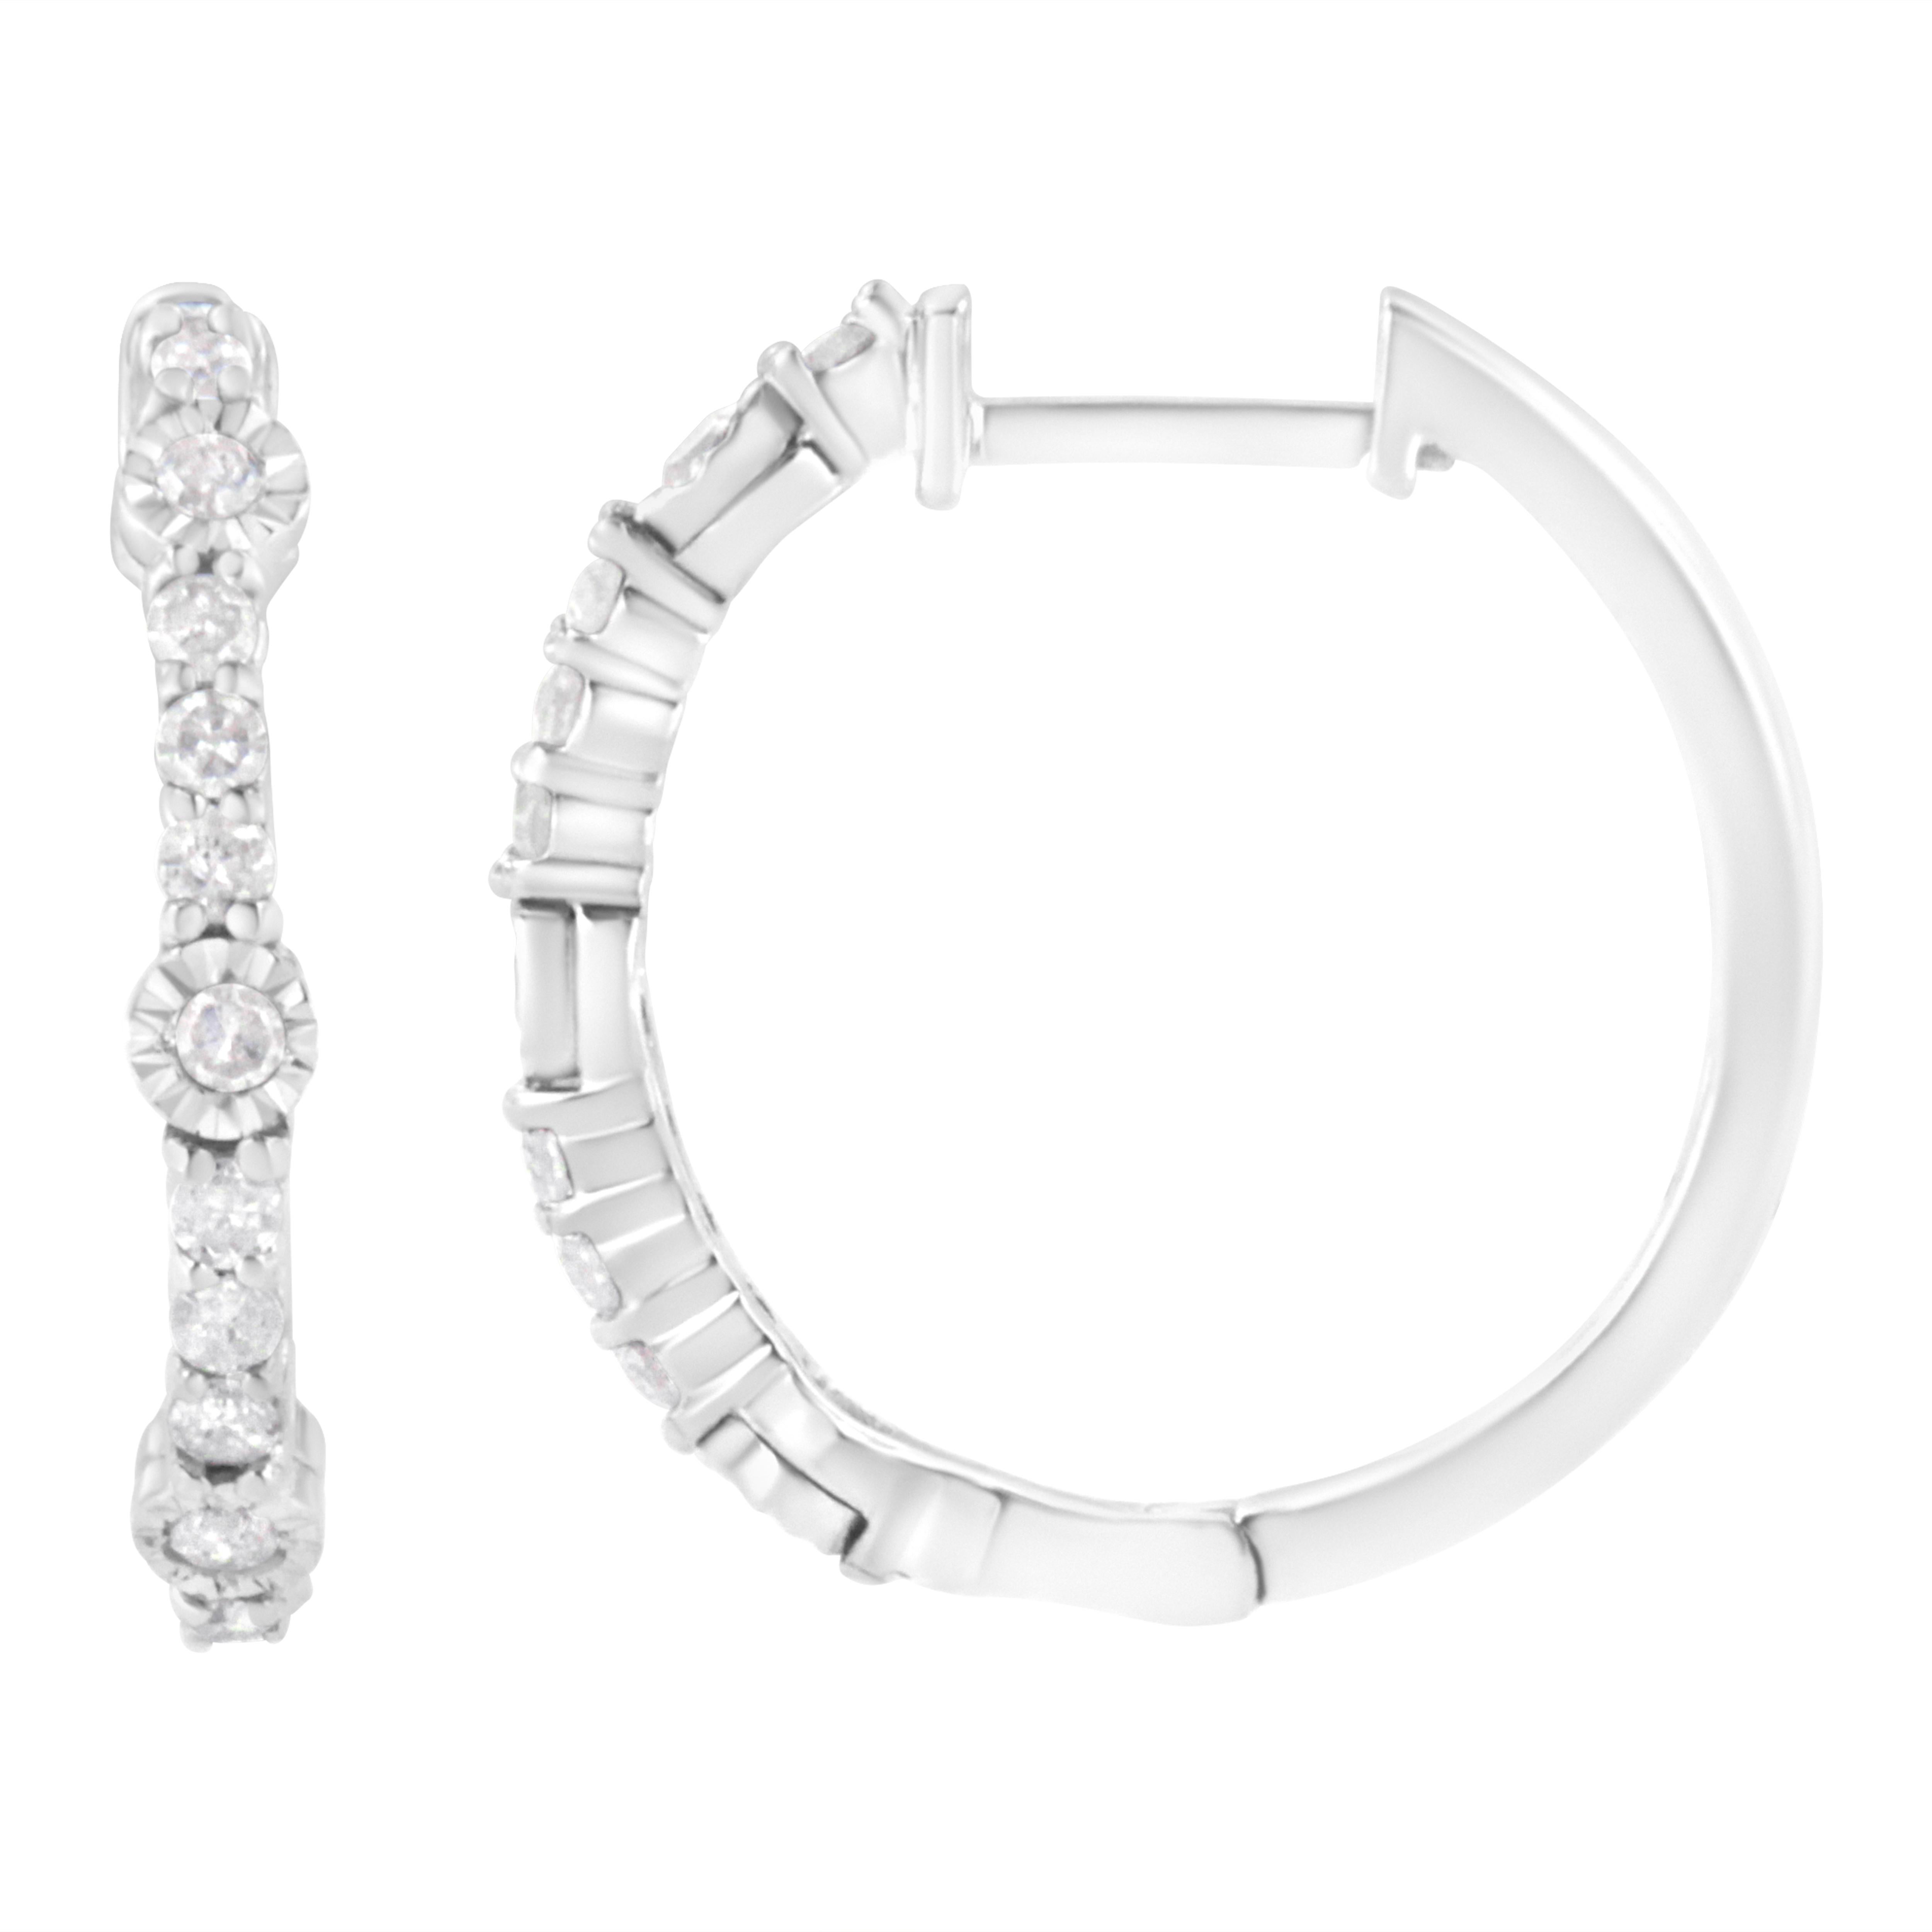 These glamorous sterling silver hoop earrings shimmer with 1/4ct TDW of diamonds. Round cut diamonds line the front of the hoops. Alternating with prong set diamonds 3 miracle set diamonds stand out and give this design a twist on the classic